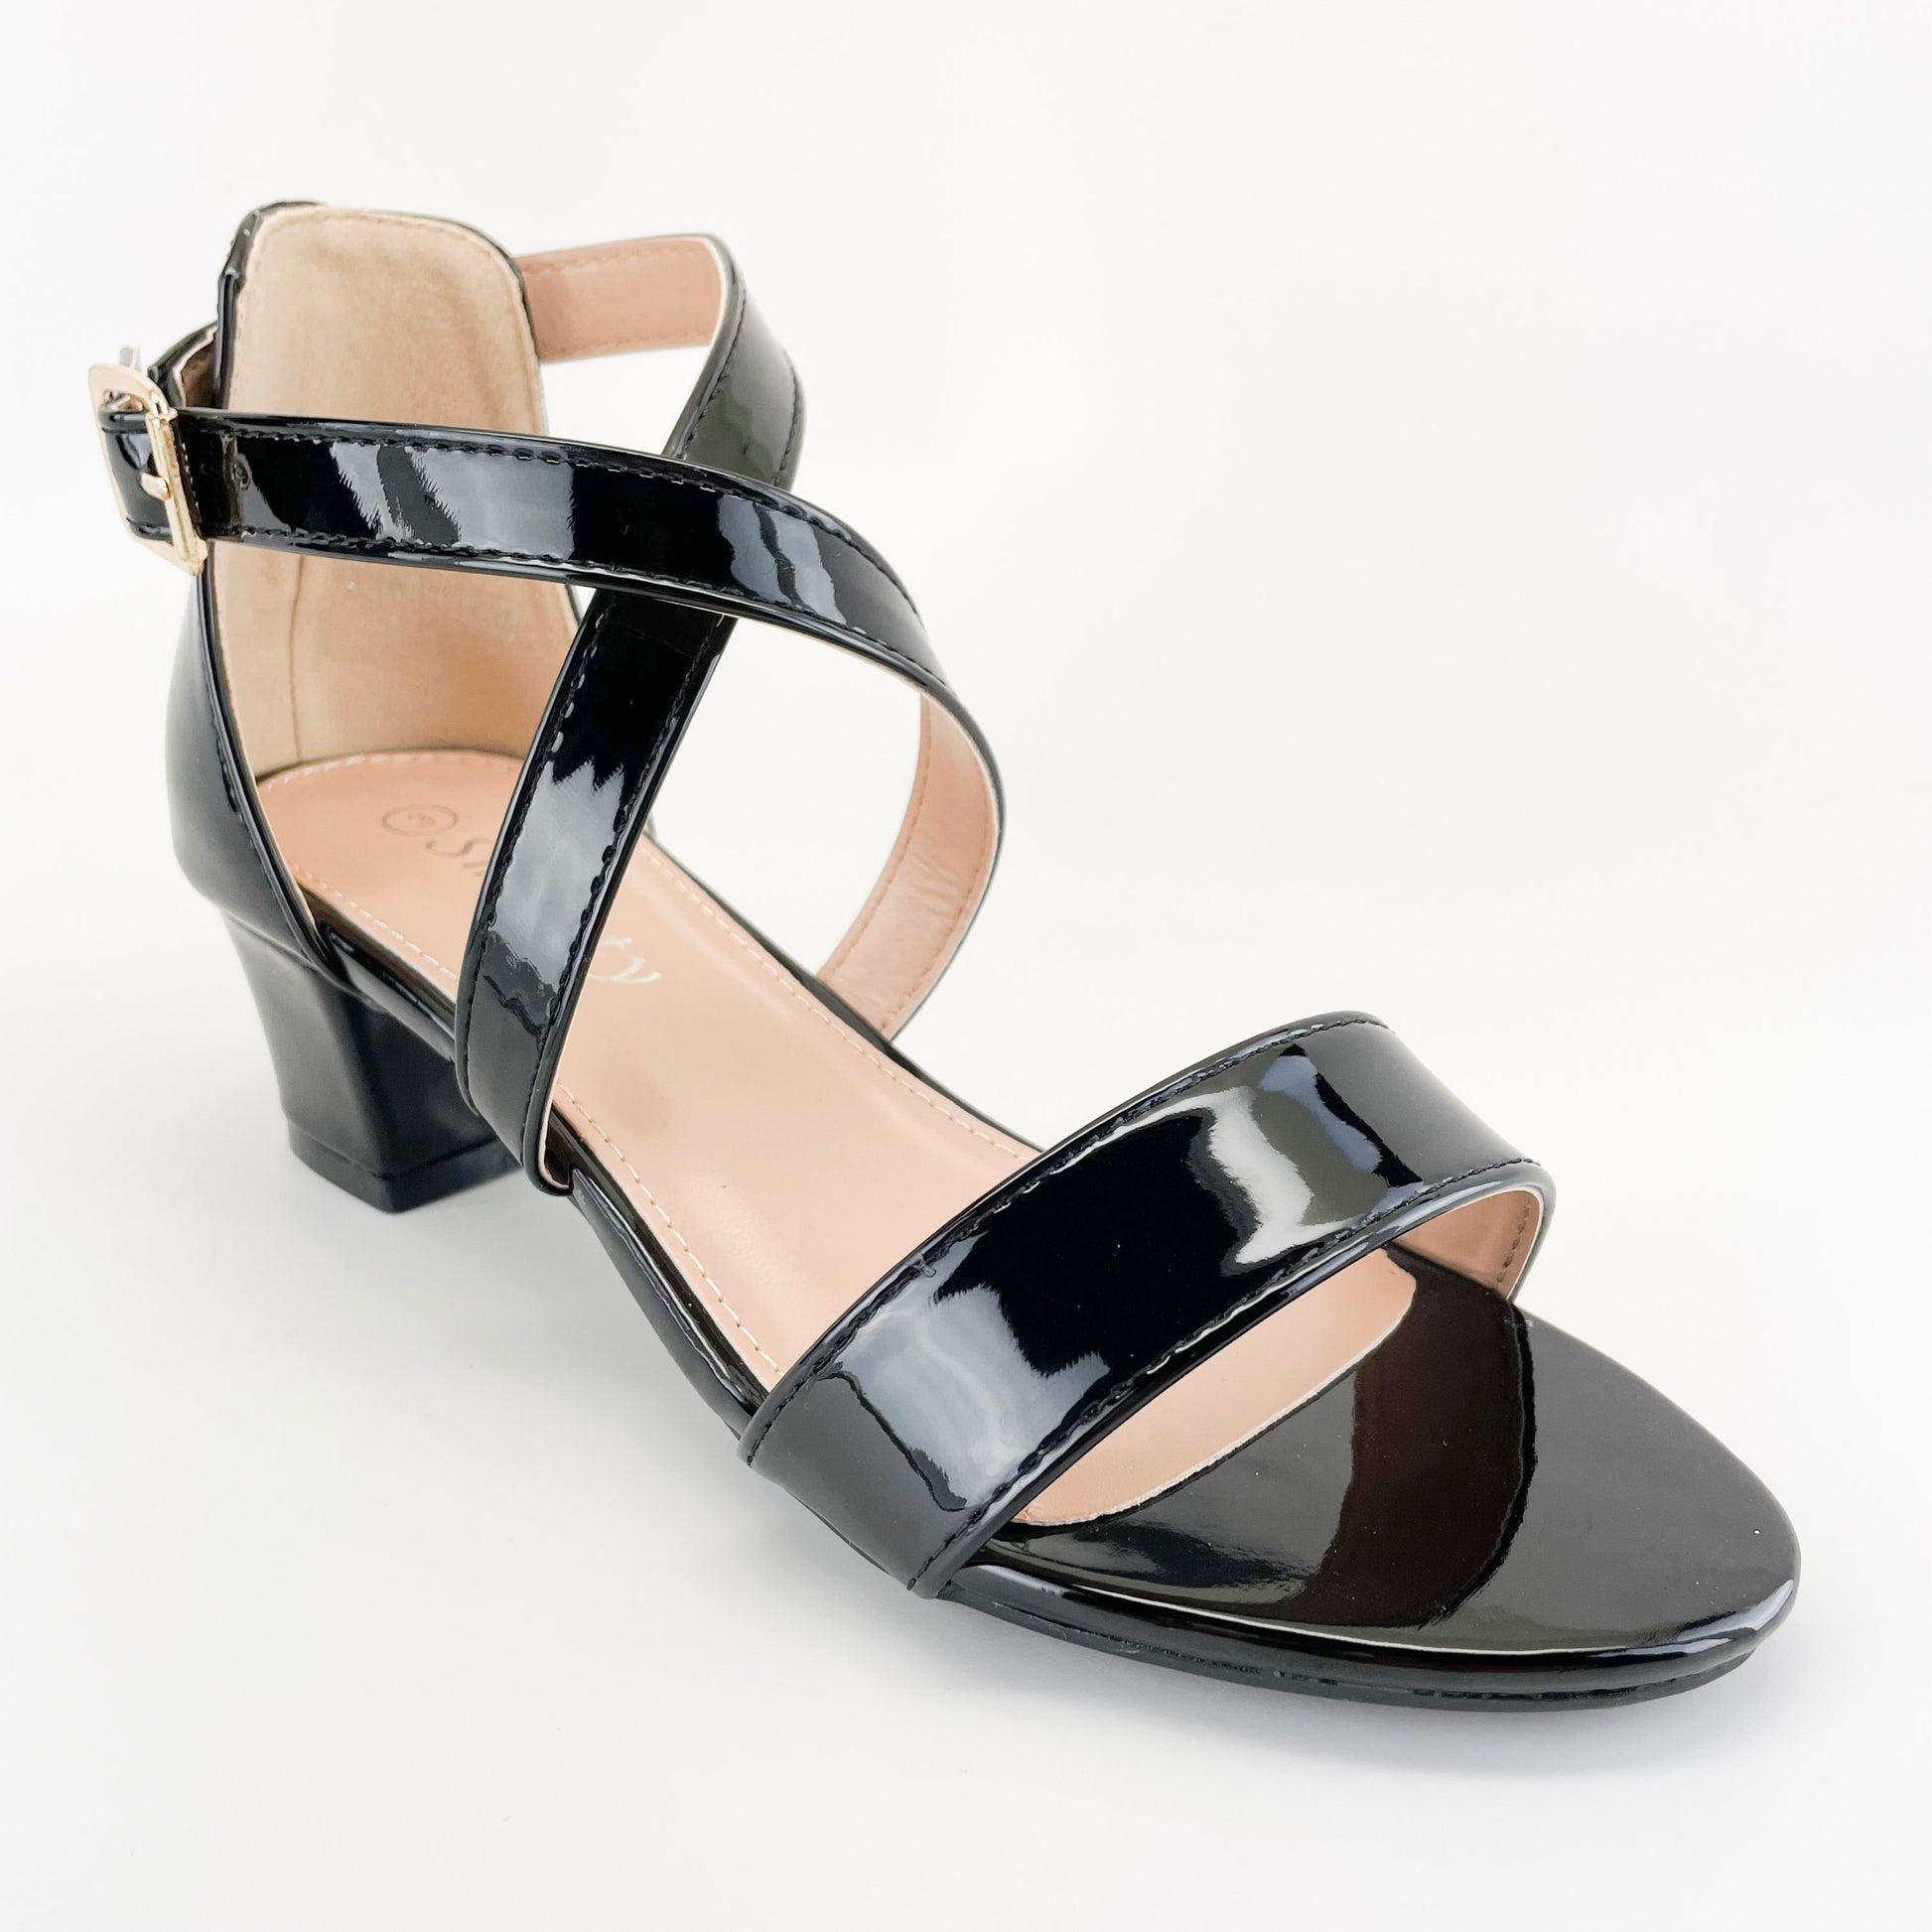 smartty tina-12km girl black pat open heels with criss cross straps and gold color buckle for graduations and holidays